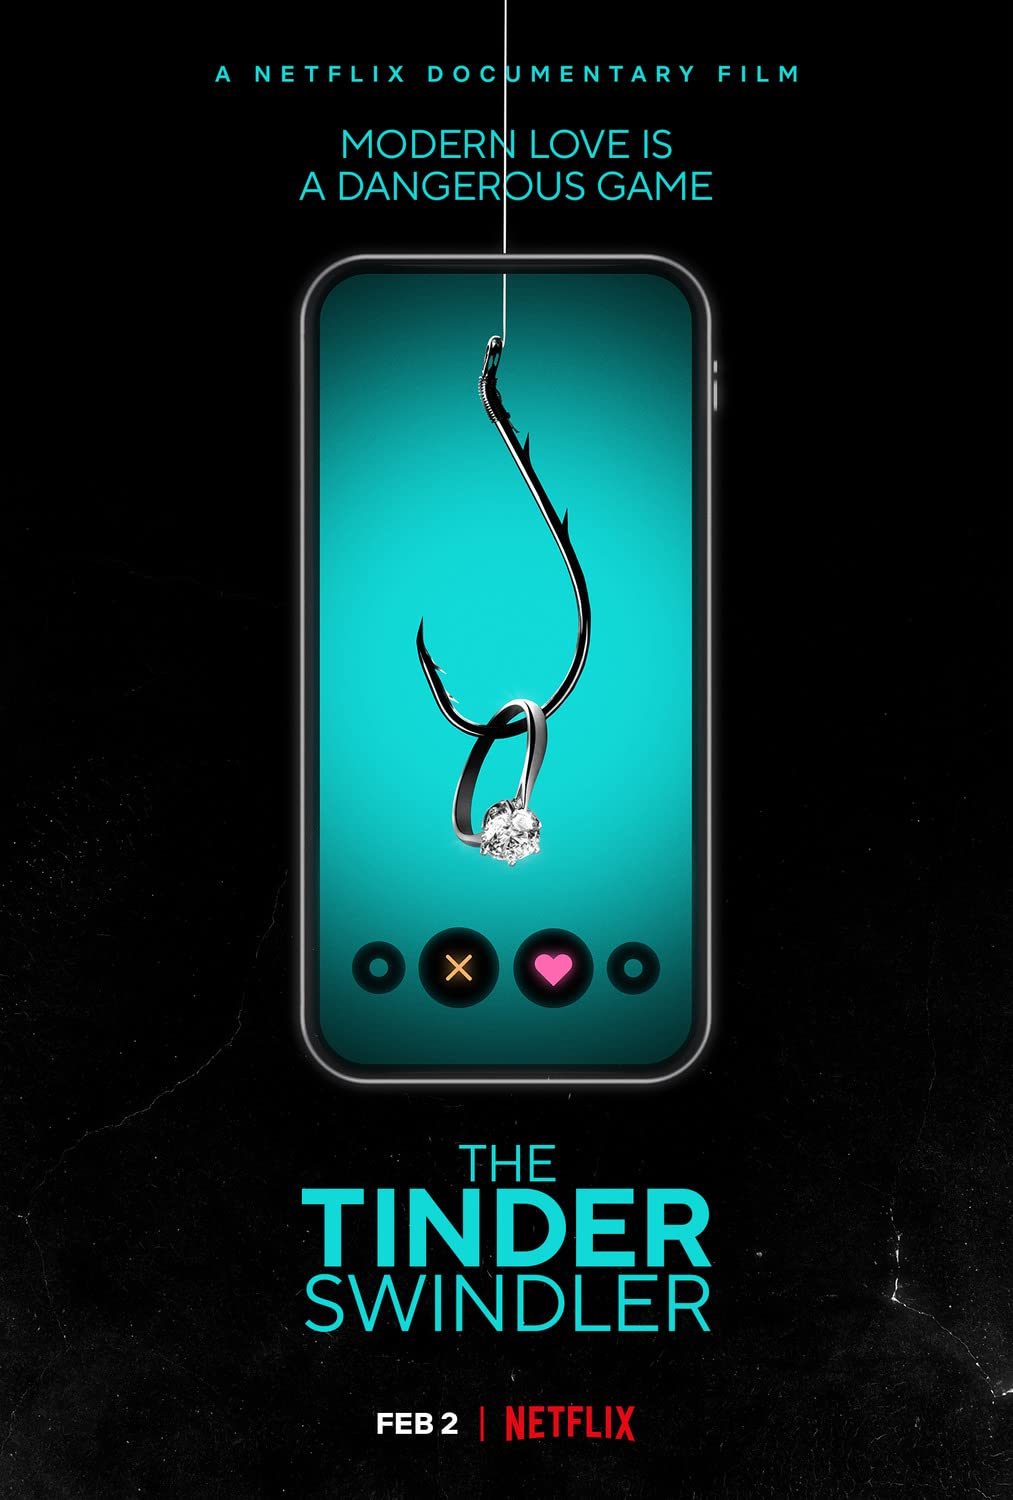 The Tinder Swindler Trailer, Coming to Netflix in February 2022